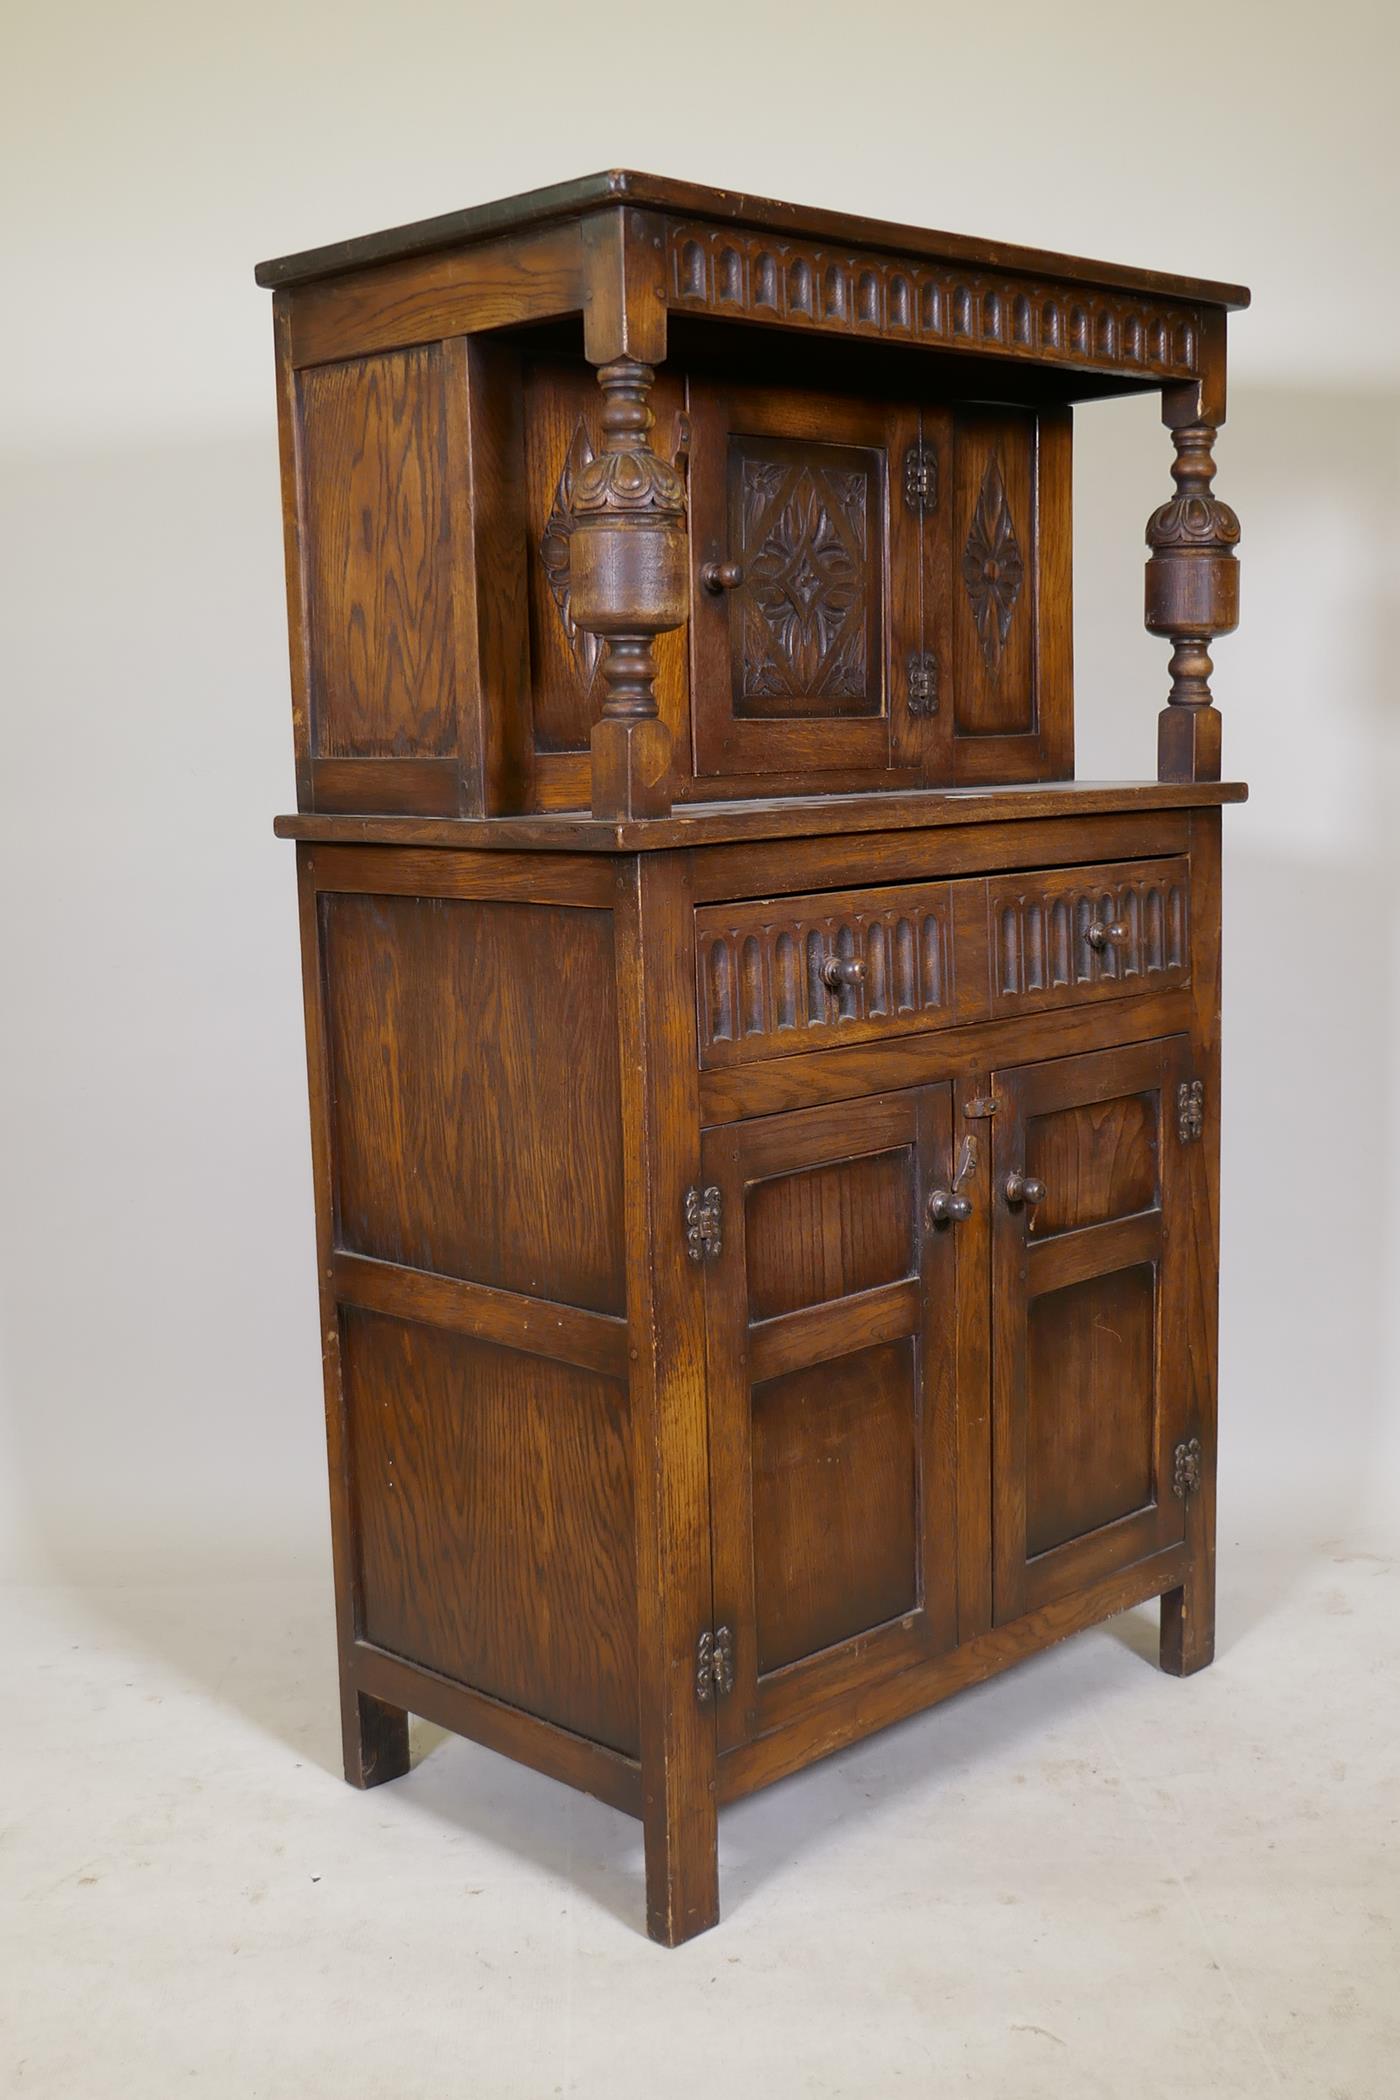 A small Reprodux of Brighton oak court cupboard, with carved frieze and decoration, single drawer - Image 2 of 2